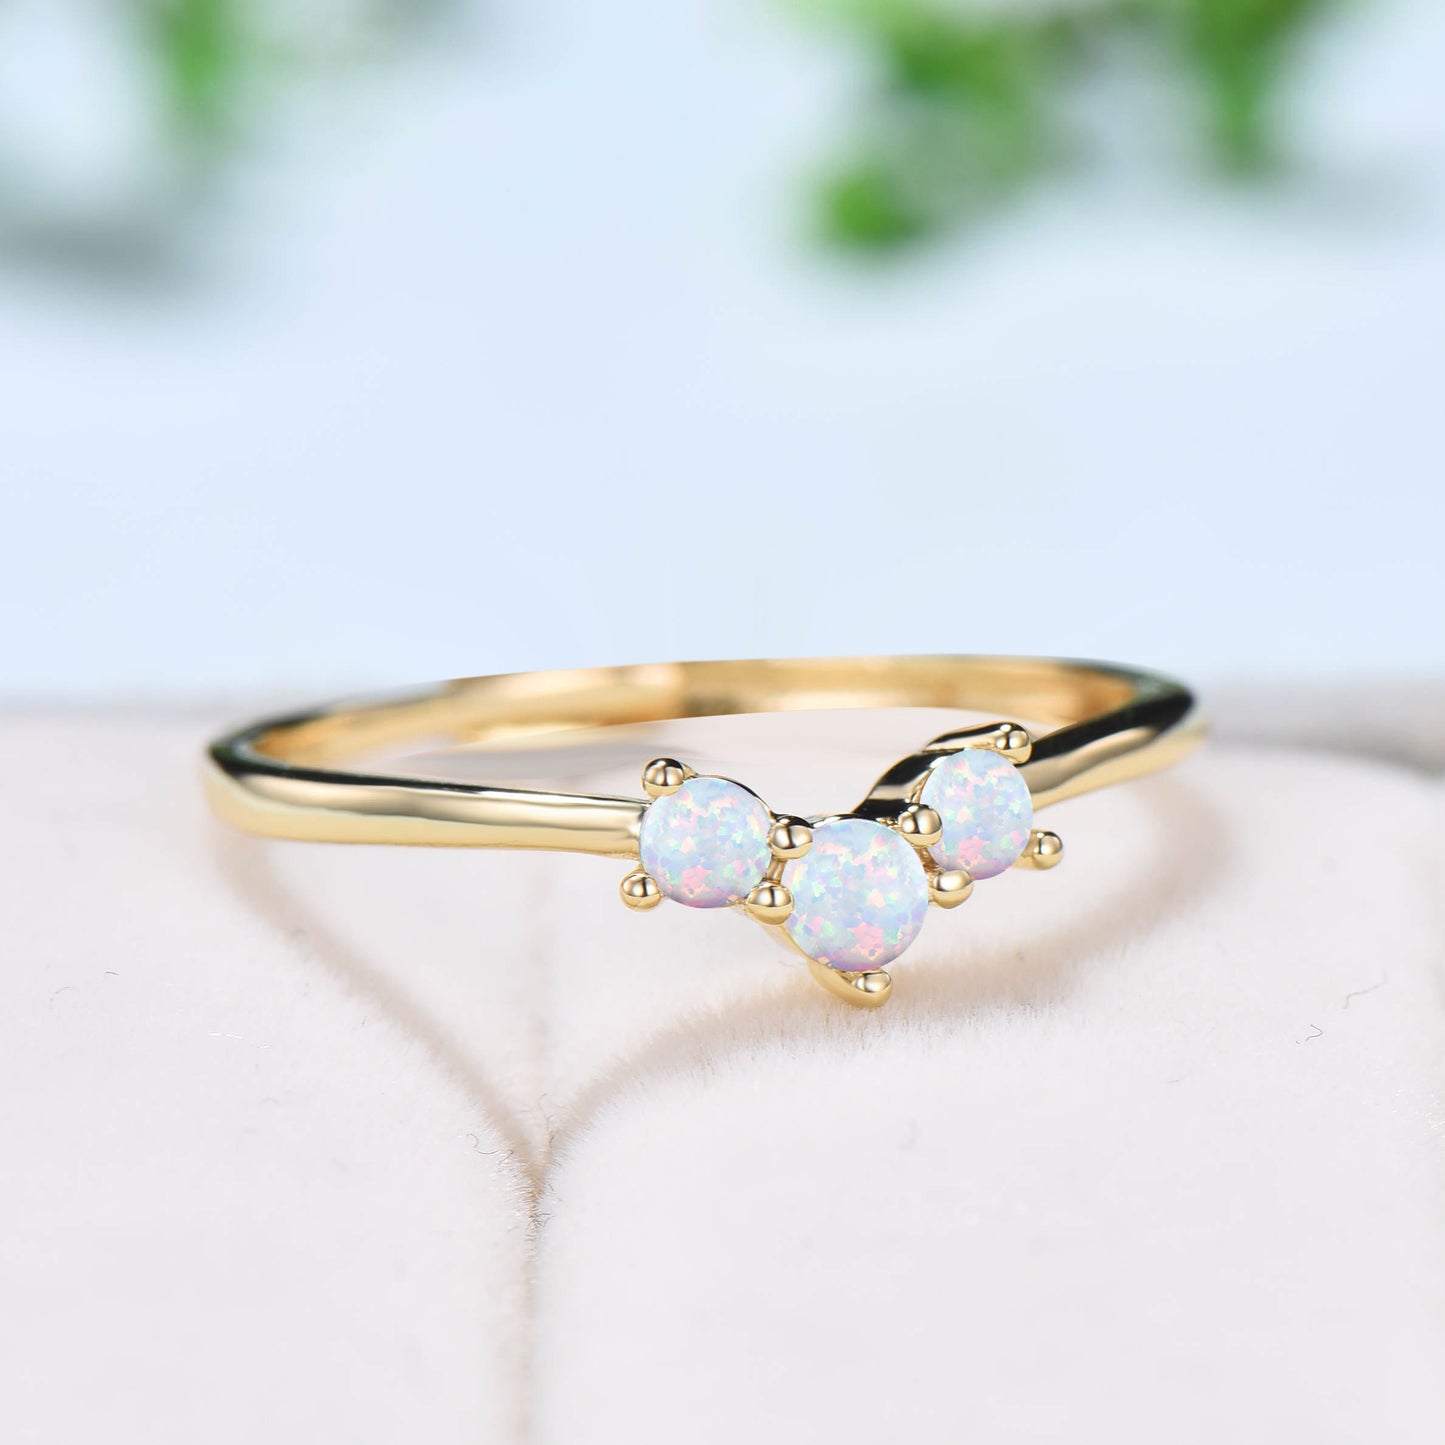 Three Stone fire opal wedding ring Minimalist white opal engagement ring opal stacking matching band Bridal Promise ring Anniversary gift - PENFINE